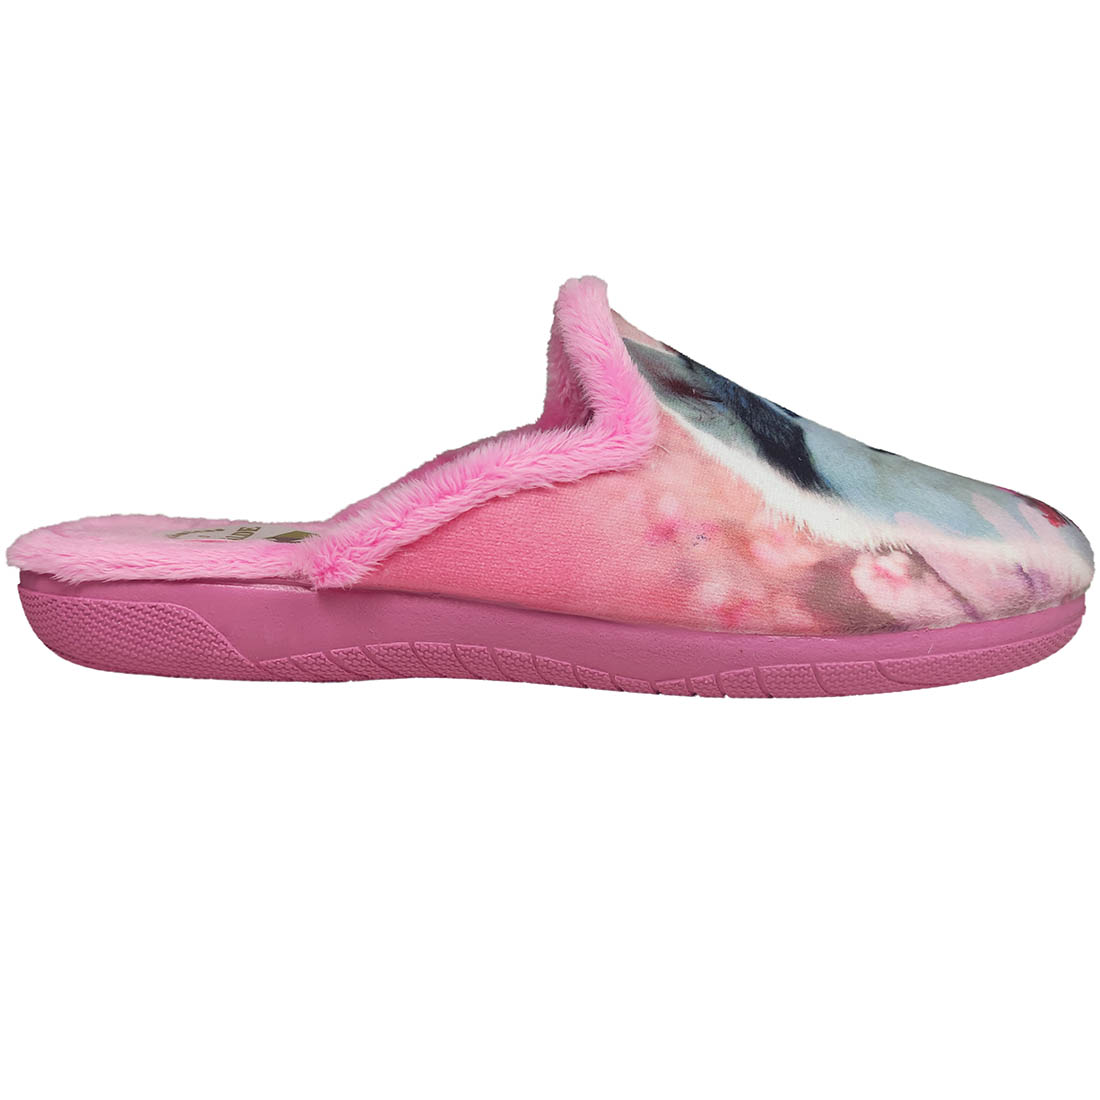 Anatomical Slippers Alcalde 6003 Pink